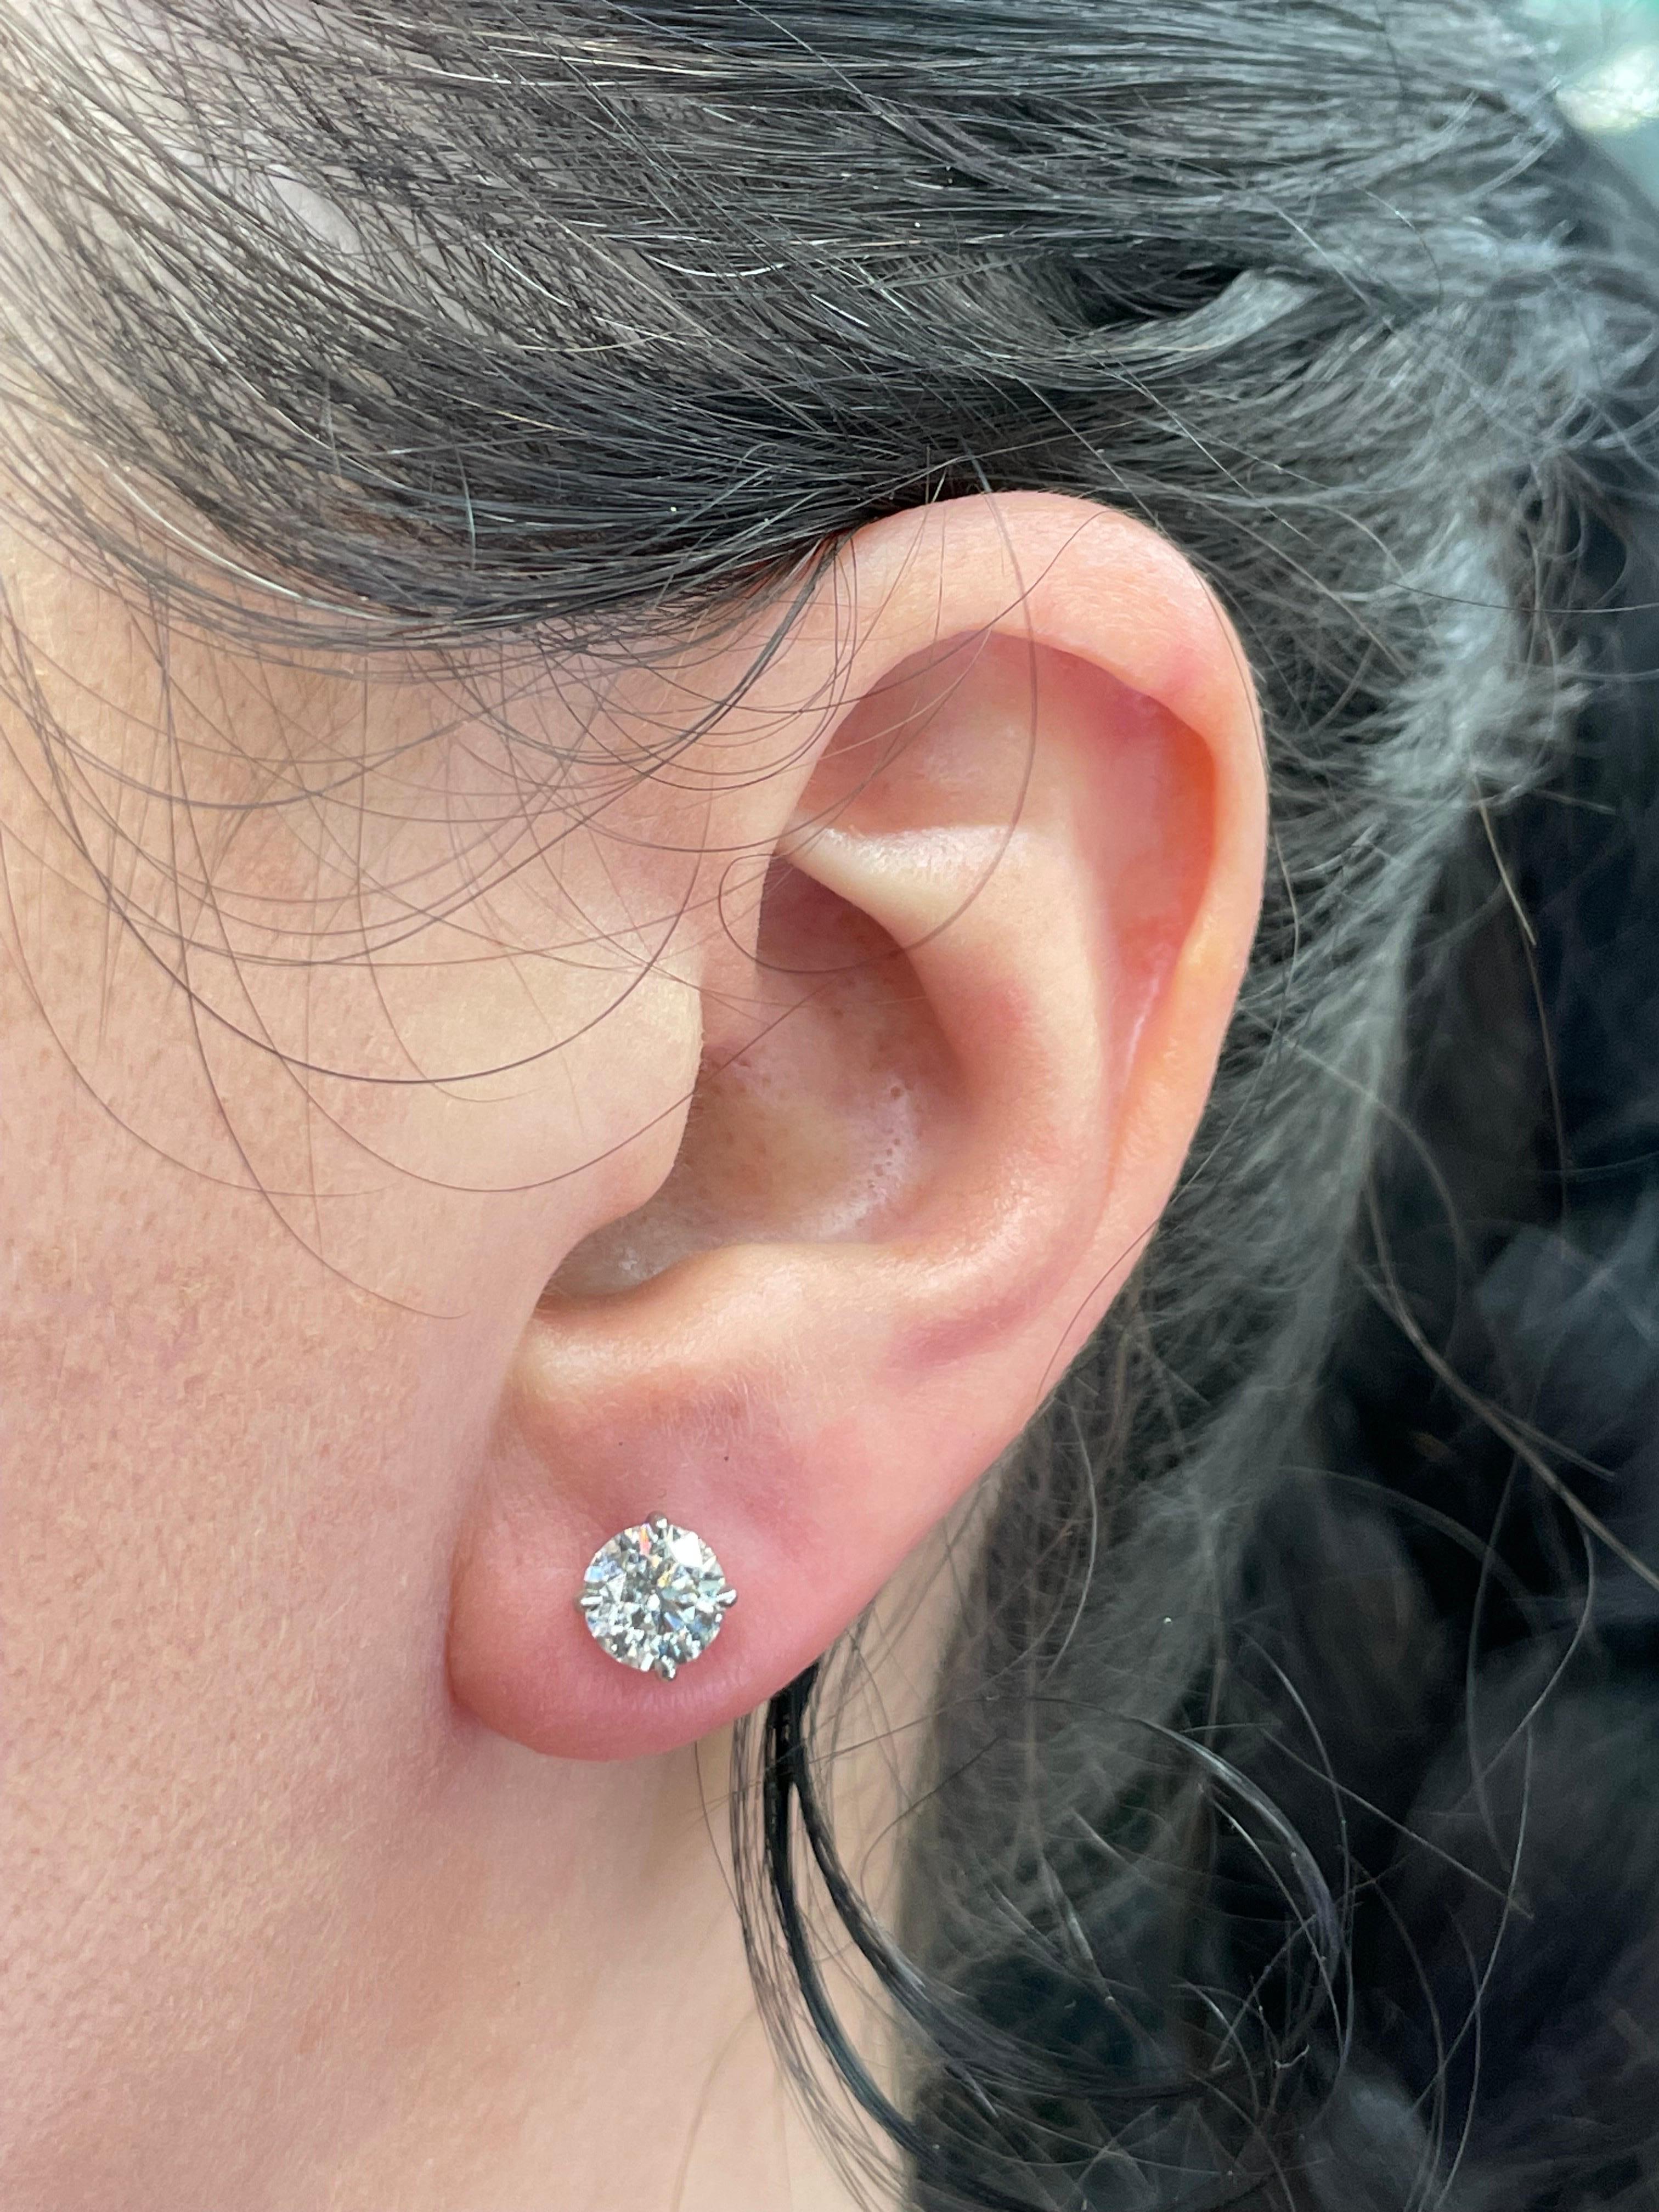 Diamond stud earrings weighing 2.01 Carats, in 18 Karat White Gold 4 Prong Champagne Setting.
Color F
Clarity SI2
Diamond Grade by our in house Gemologist
 
Setting can be changed to a Basket, Martini or Champagne/ 3 or 4 Prong/ 14 or 18 Karat.
DM